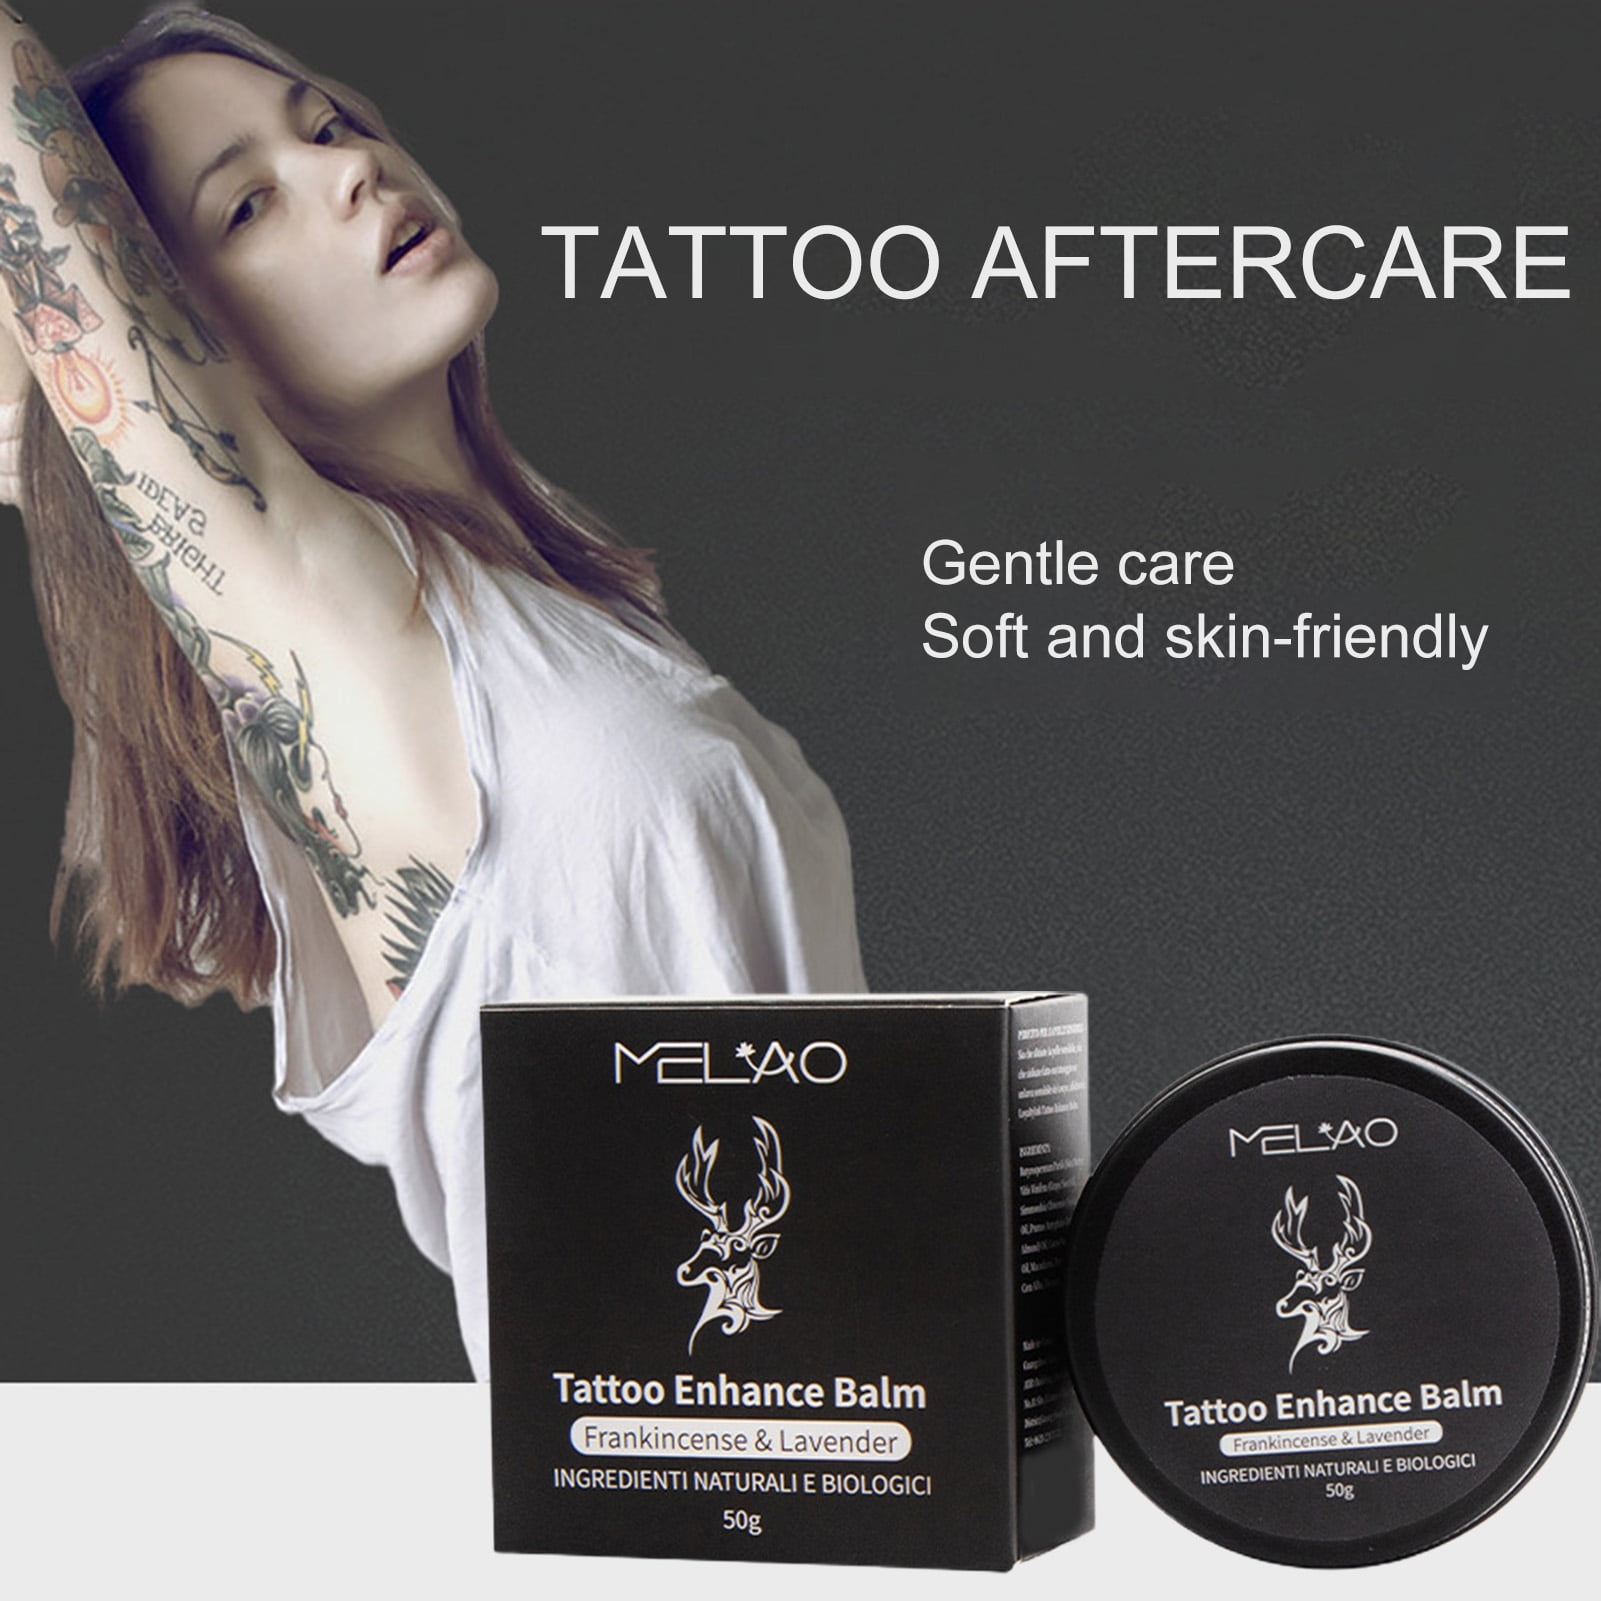 Flm 20ML/30ML/50ML Tattoo Aftercare Ointment Keep Moisture Safe  Professional Anti Scar Tattoo Aftercare Cream for Personal Use - Walmart.com